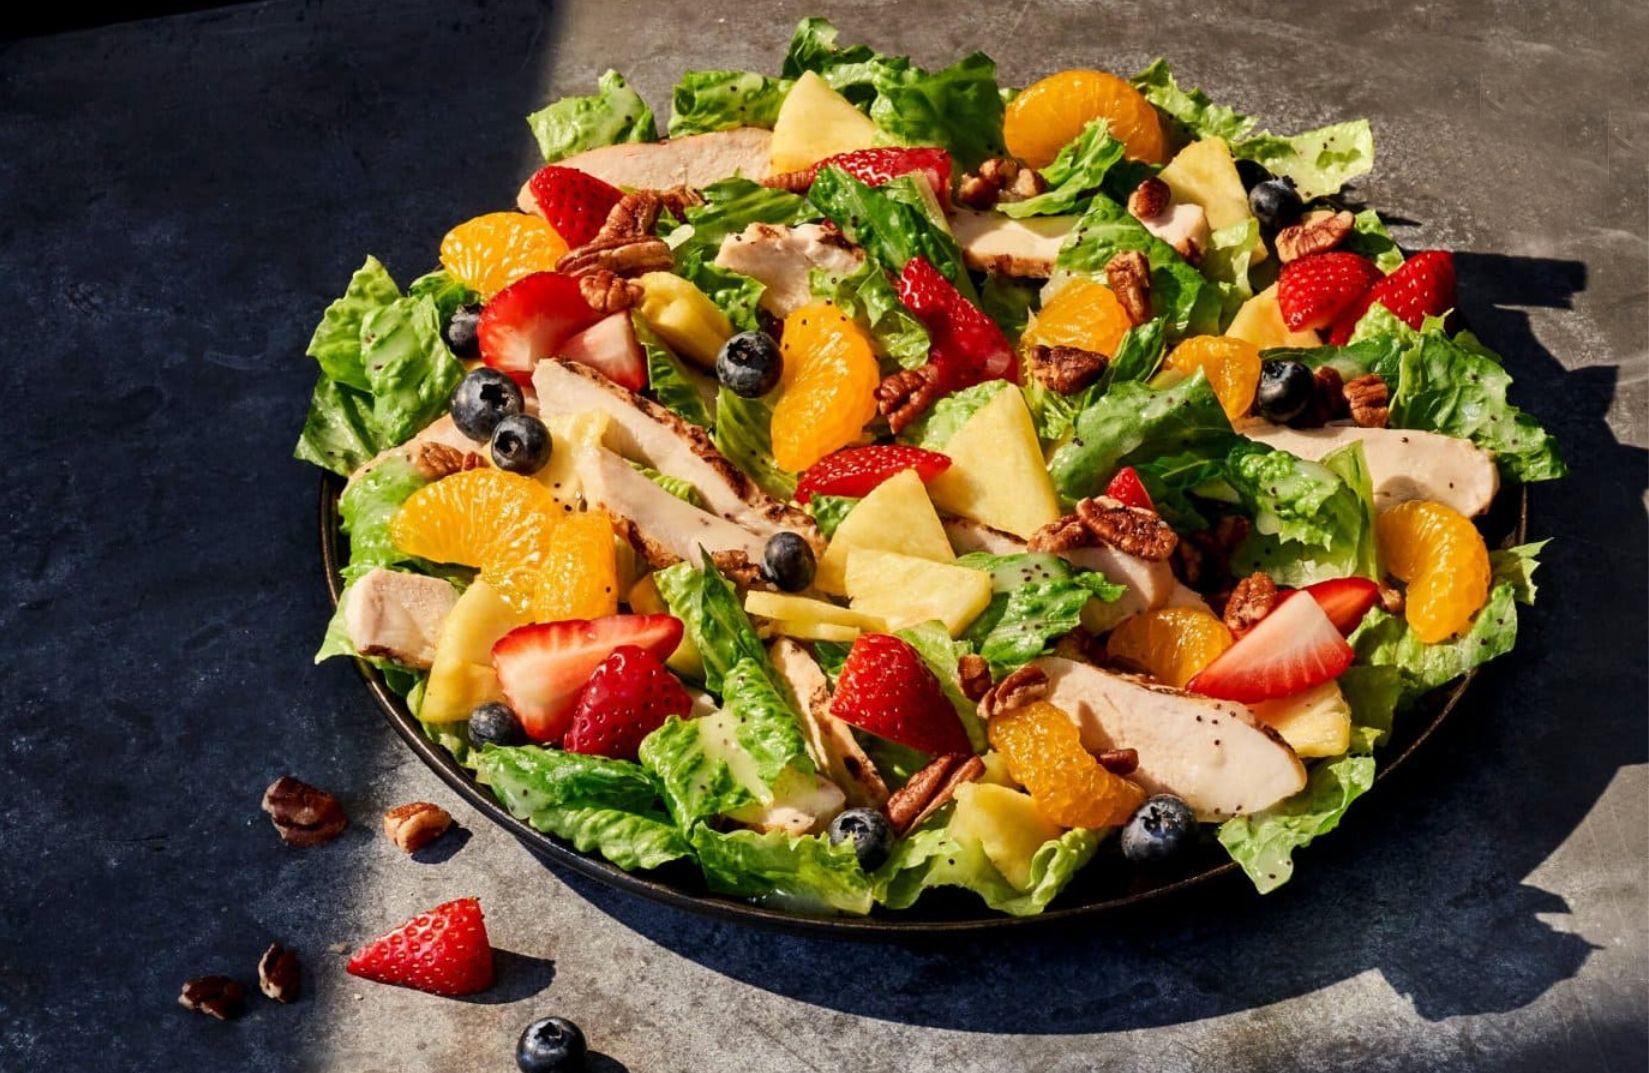 Panera Bread’s Signature Strawberry Poppyseed Salad with Chicken is Back